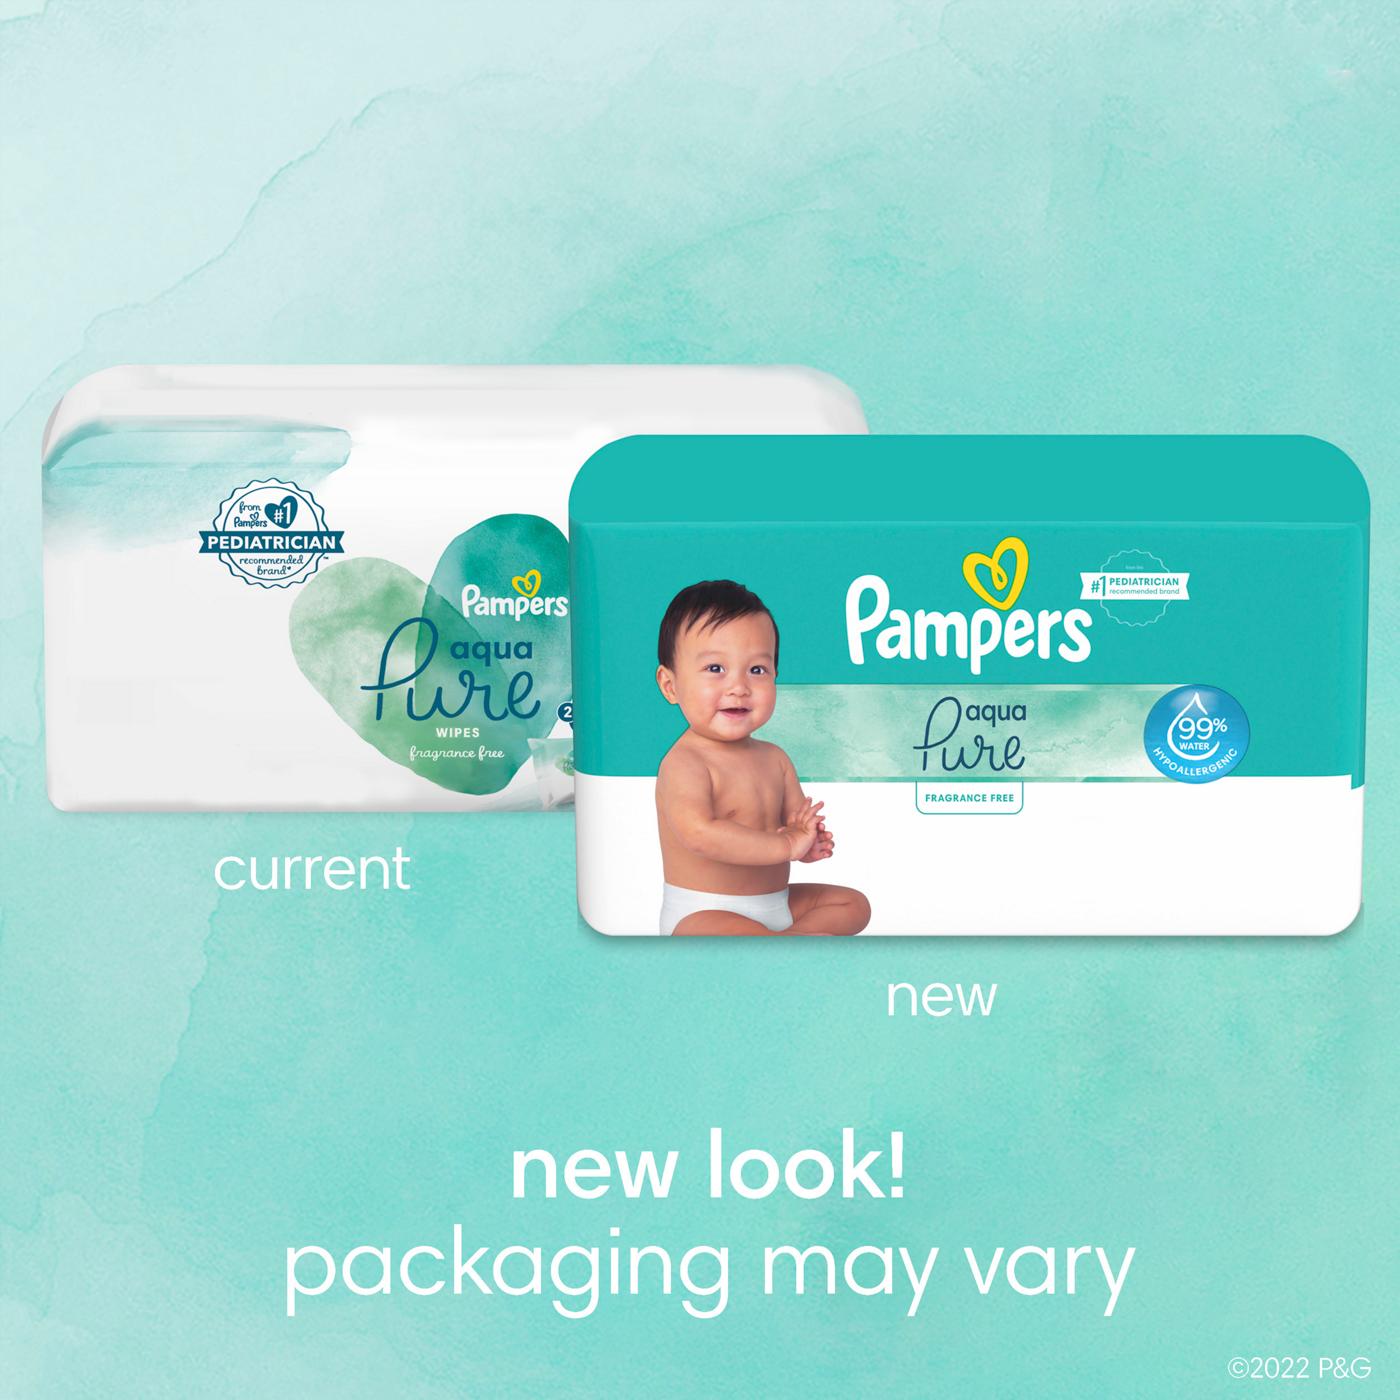 Pampers Aqua Pure Baby Wipes 12 pk; image 9 of 9